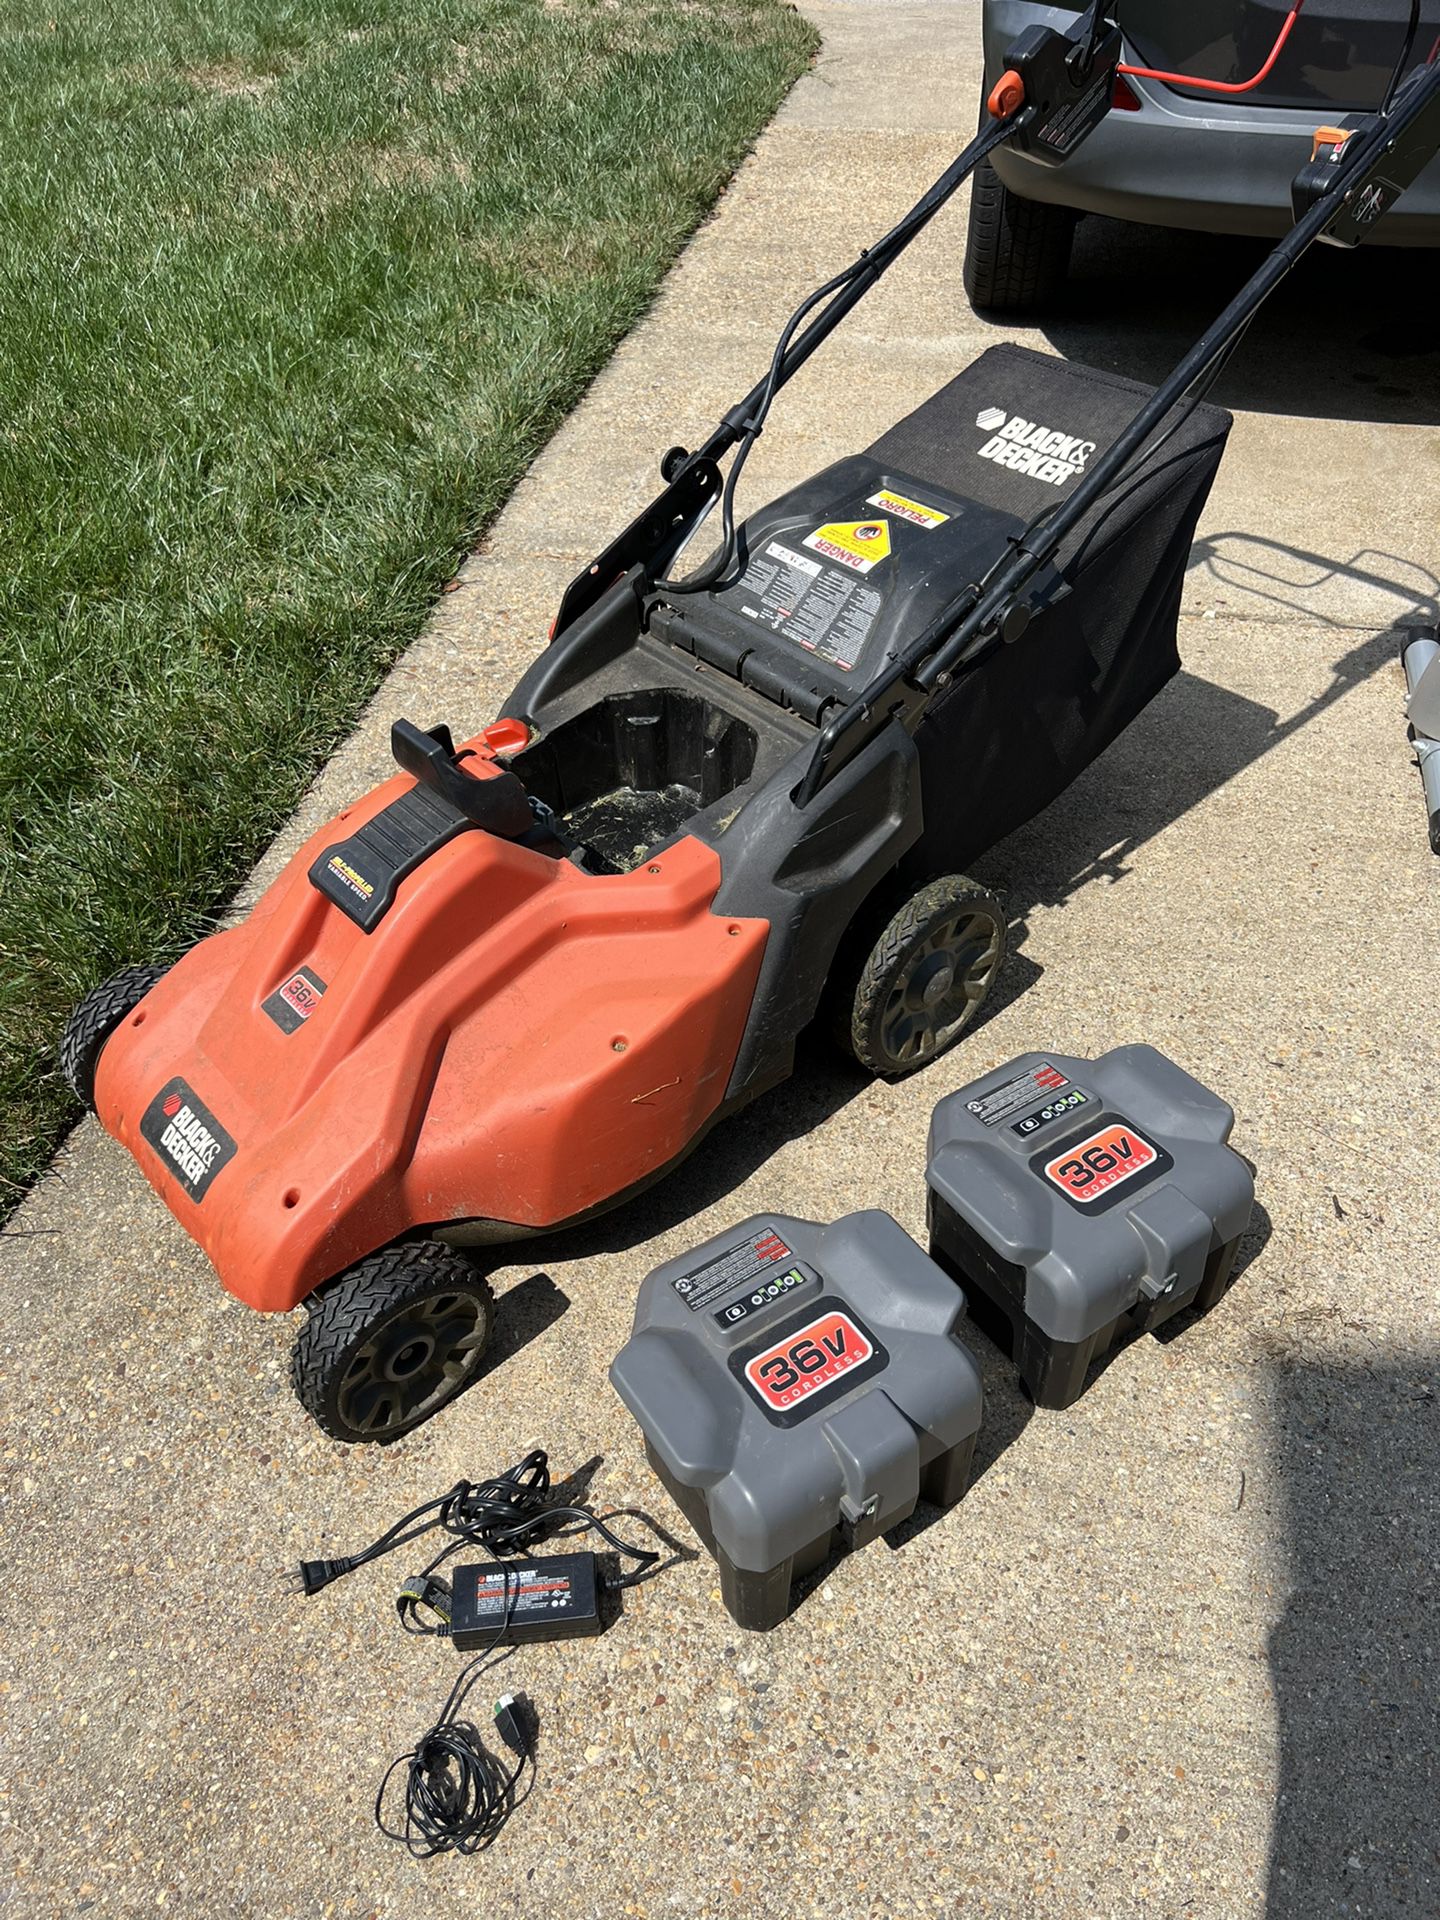 Black and Decker 36V cordless Lawnmower for Sale in Virginia Beach